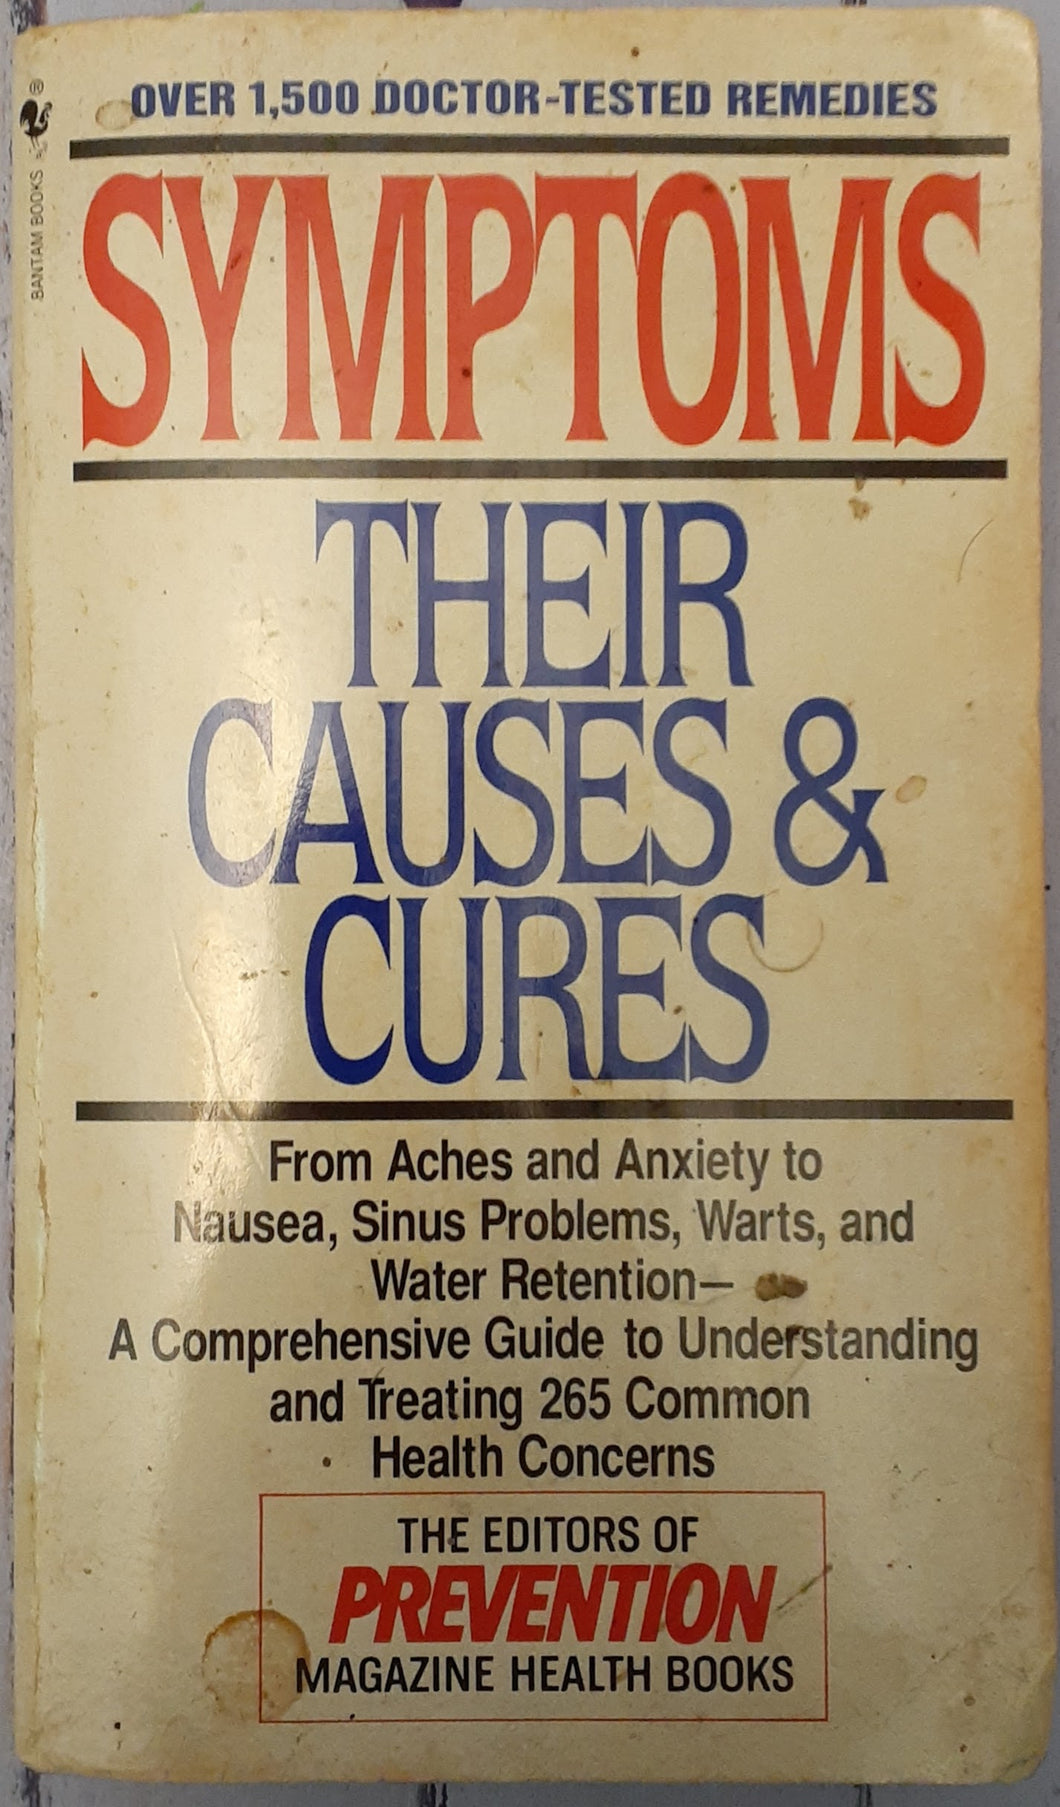 Symptoms - Their Causes & Cures